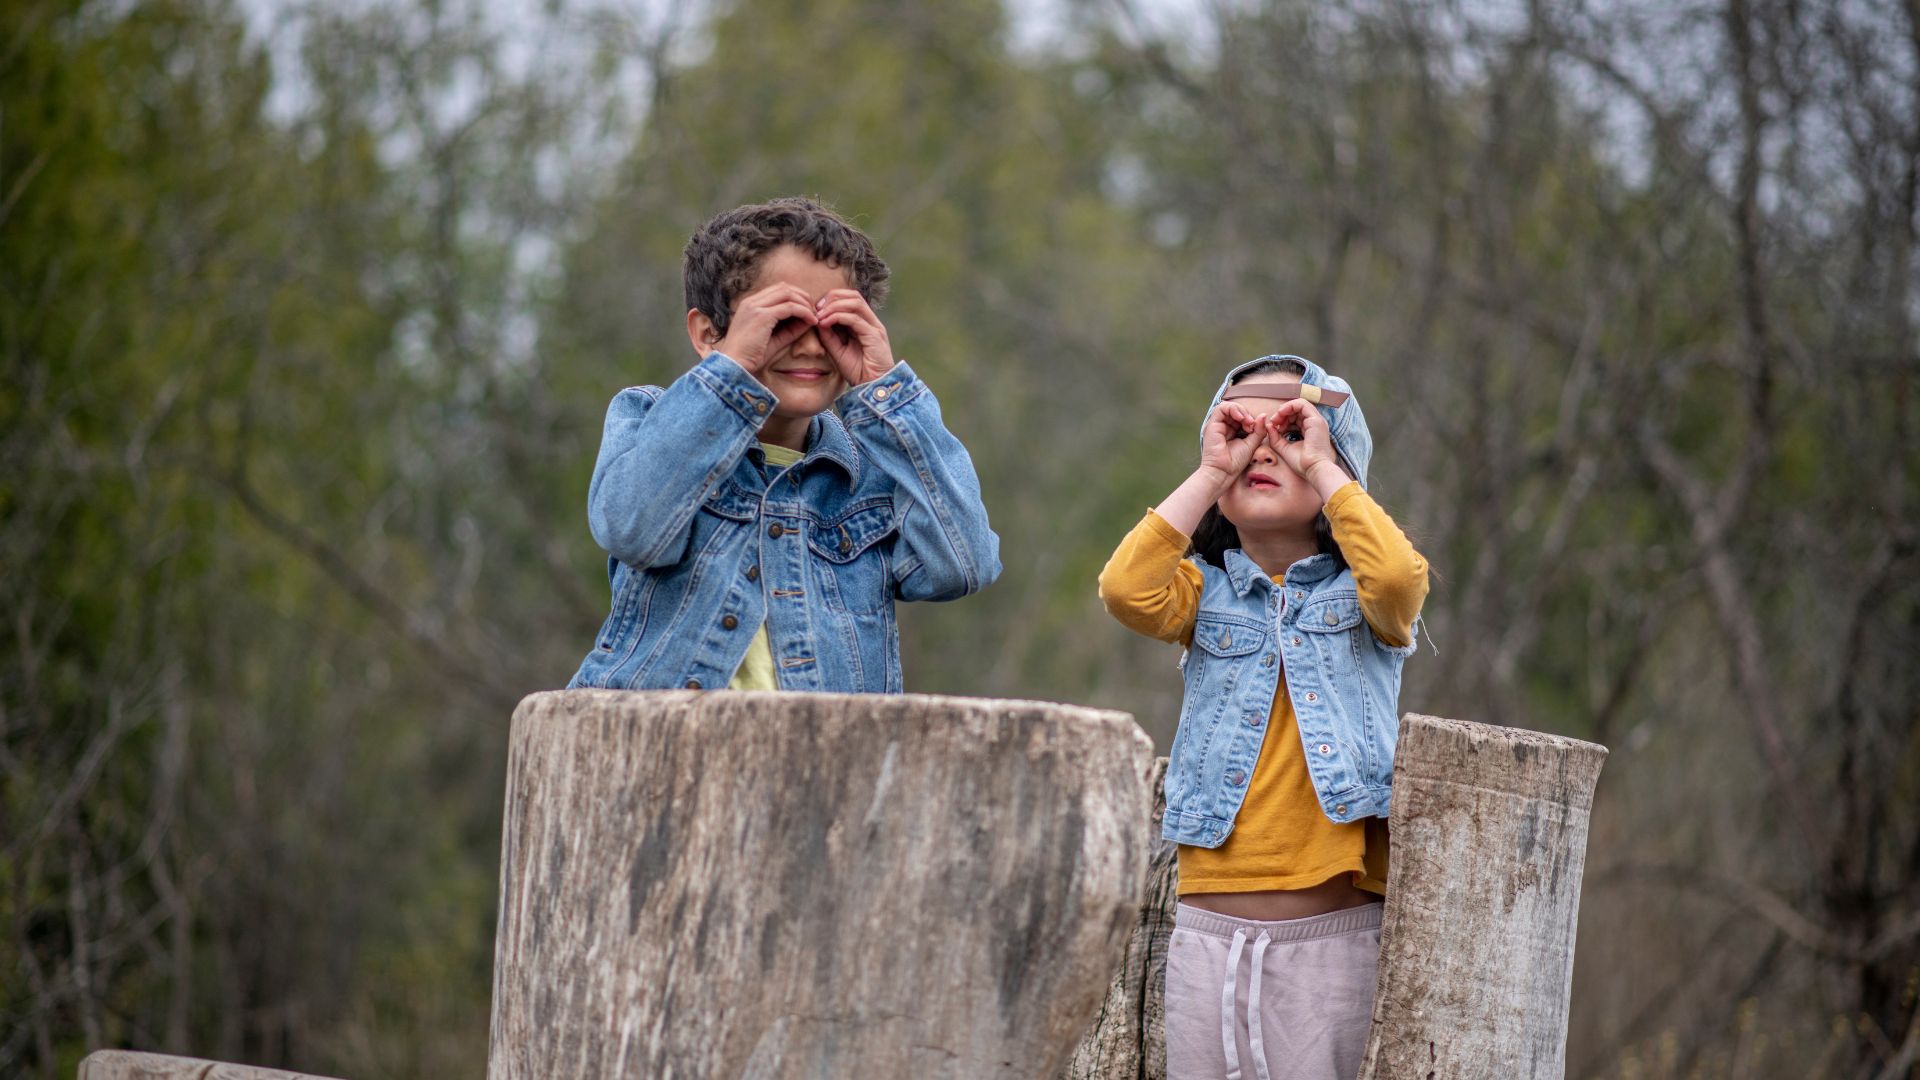 two kids using their hands as binoculars to look at the forest around them